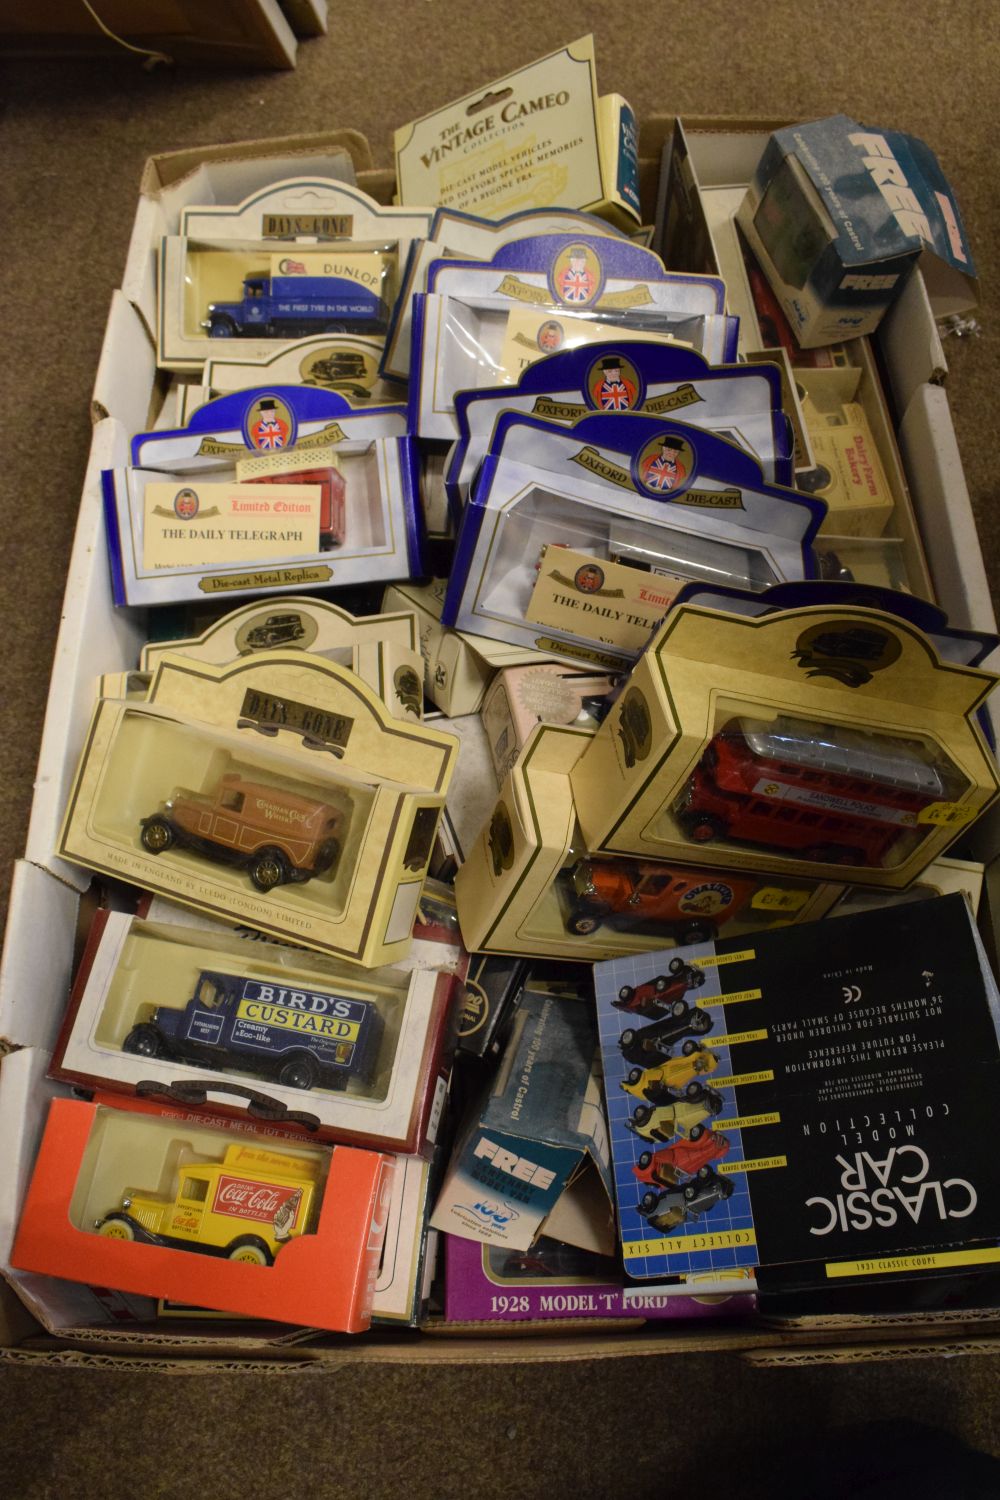 Quantity of boxed Oxford die-cast, Lledo and other die-cast model vehicles